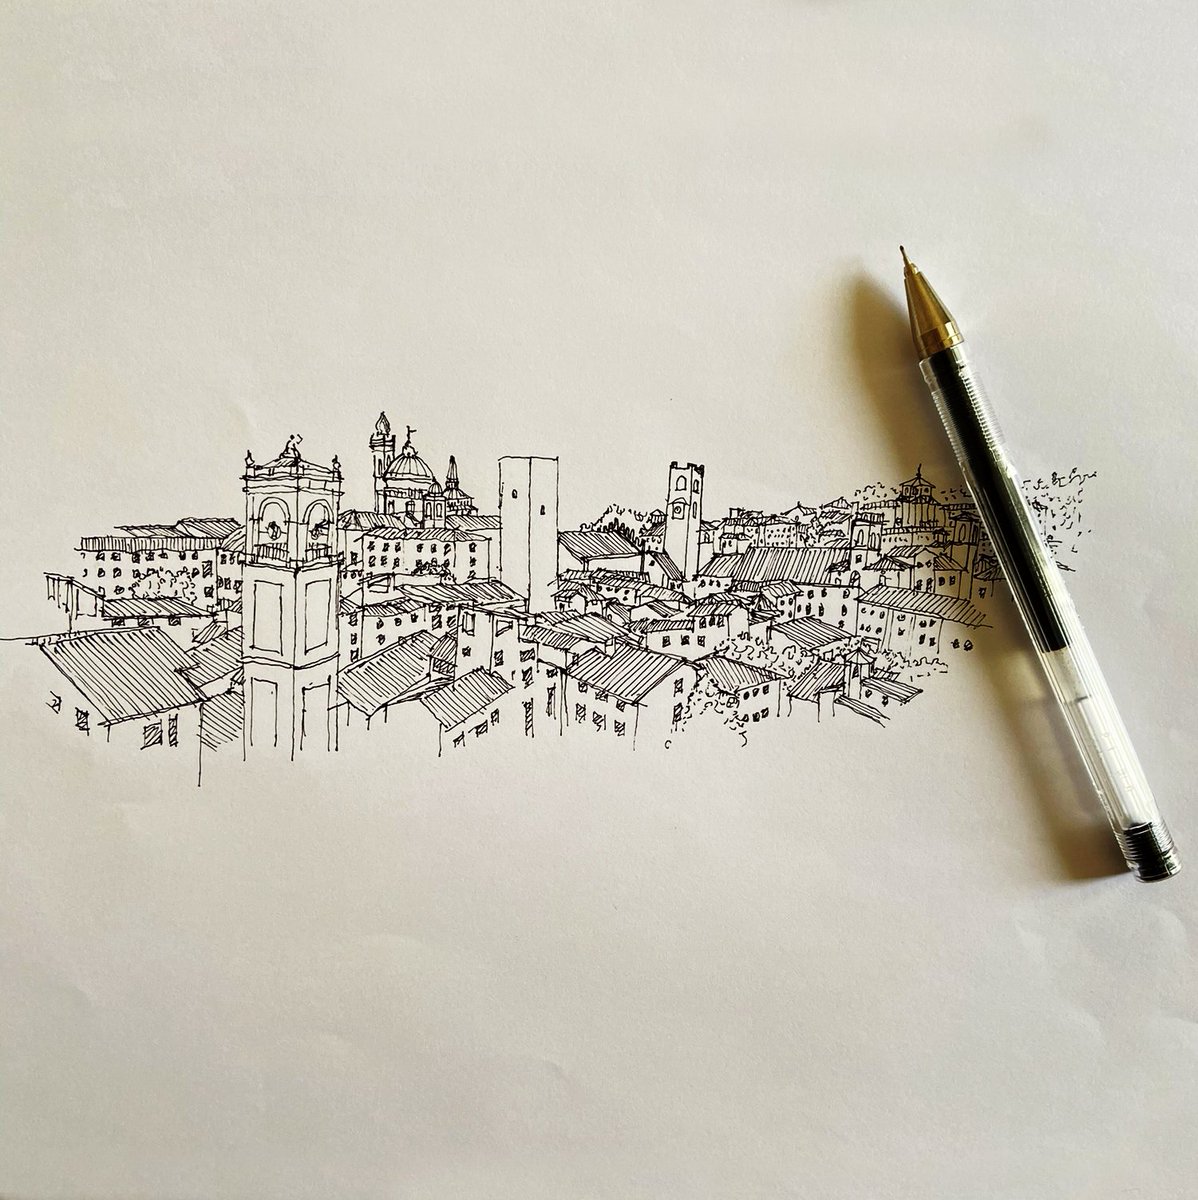 Bergamo sketch centered on the skyline of the Old Town (La Città Alta) and its architecture. #bergamo #italy #travel #sketch #panoramicview #oldtown #architecture #cityscape #cityscape #sketchdaily